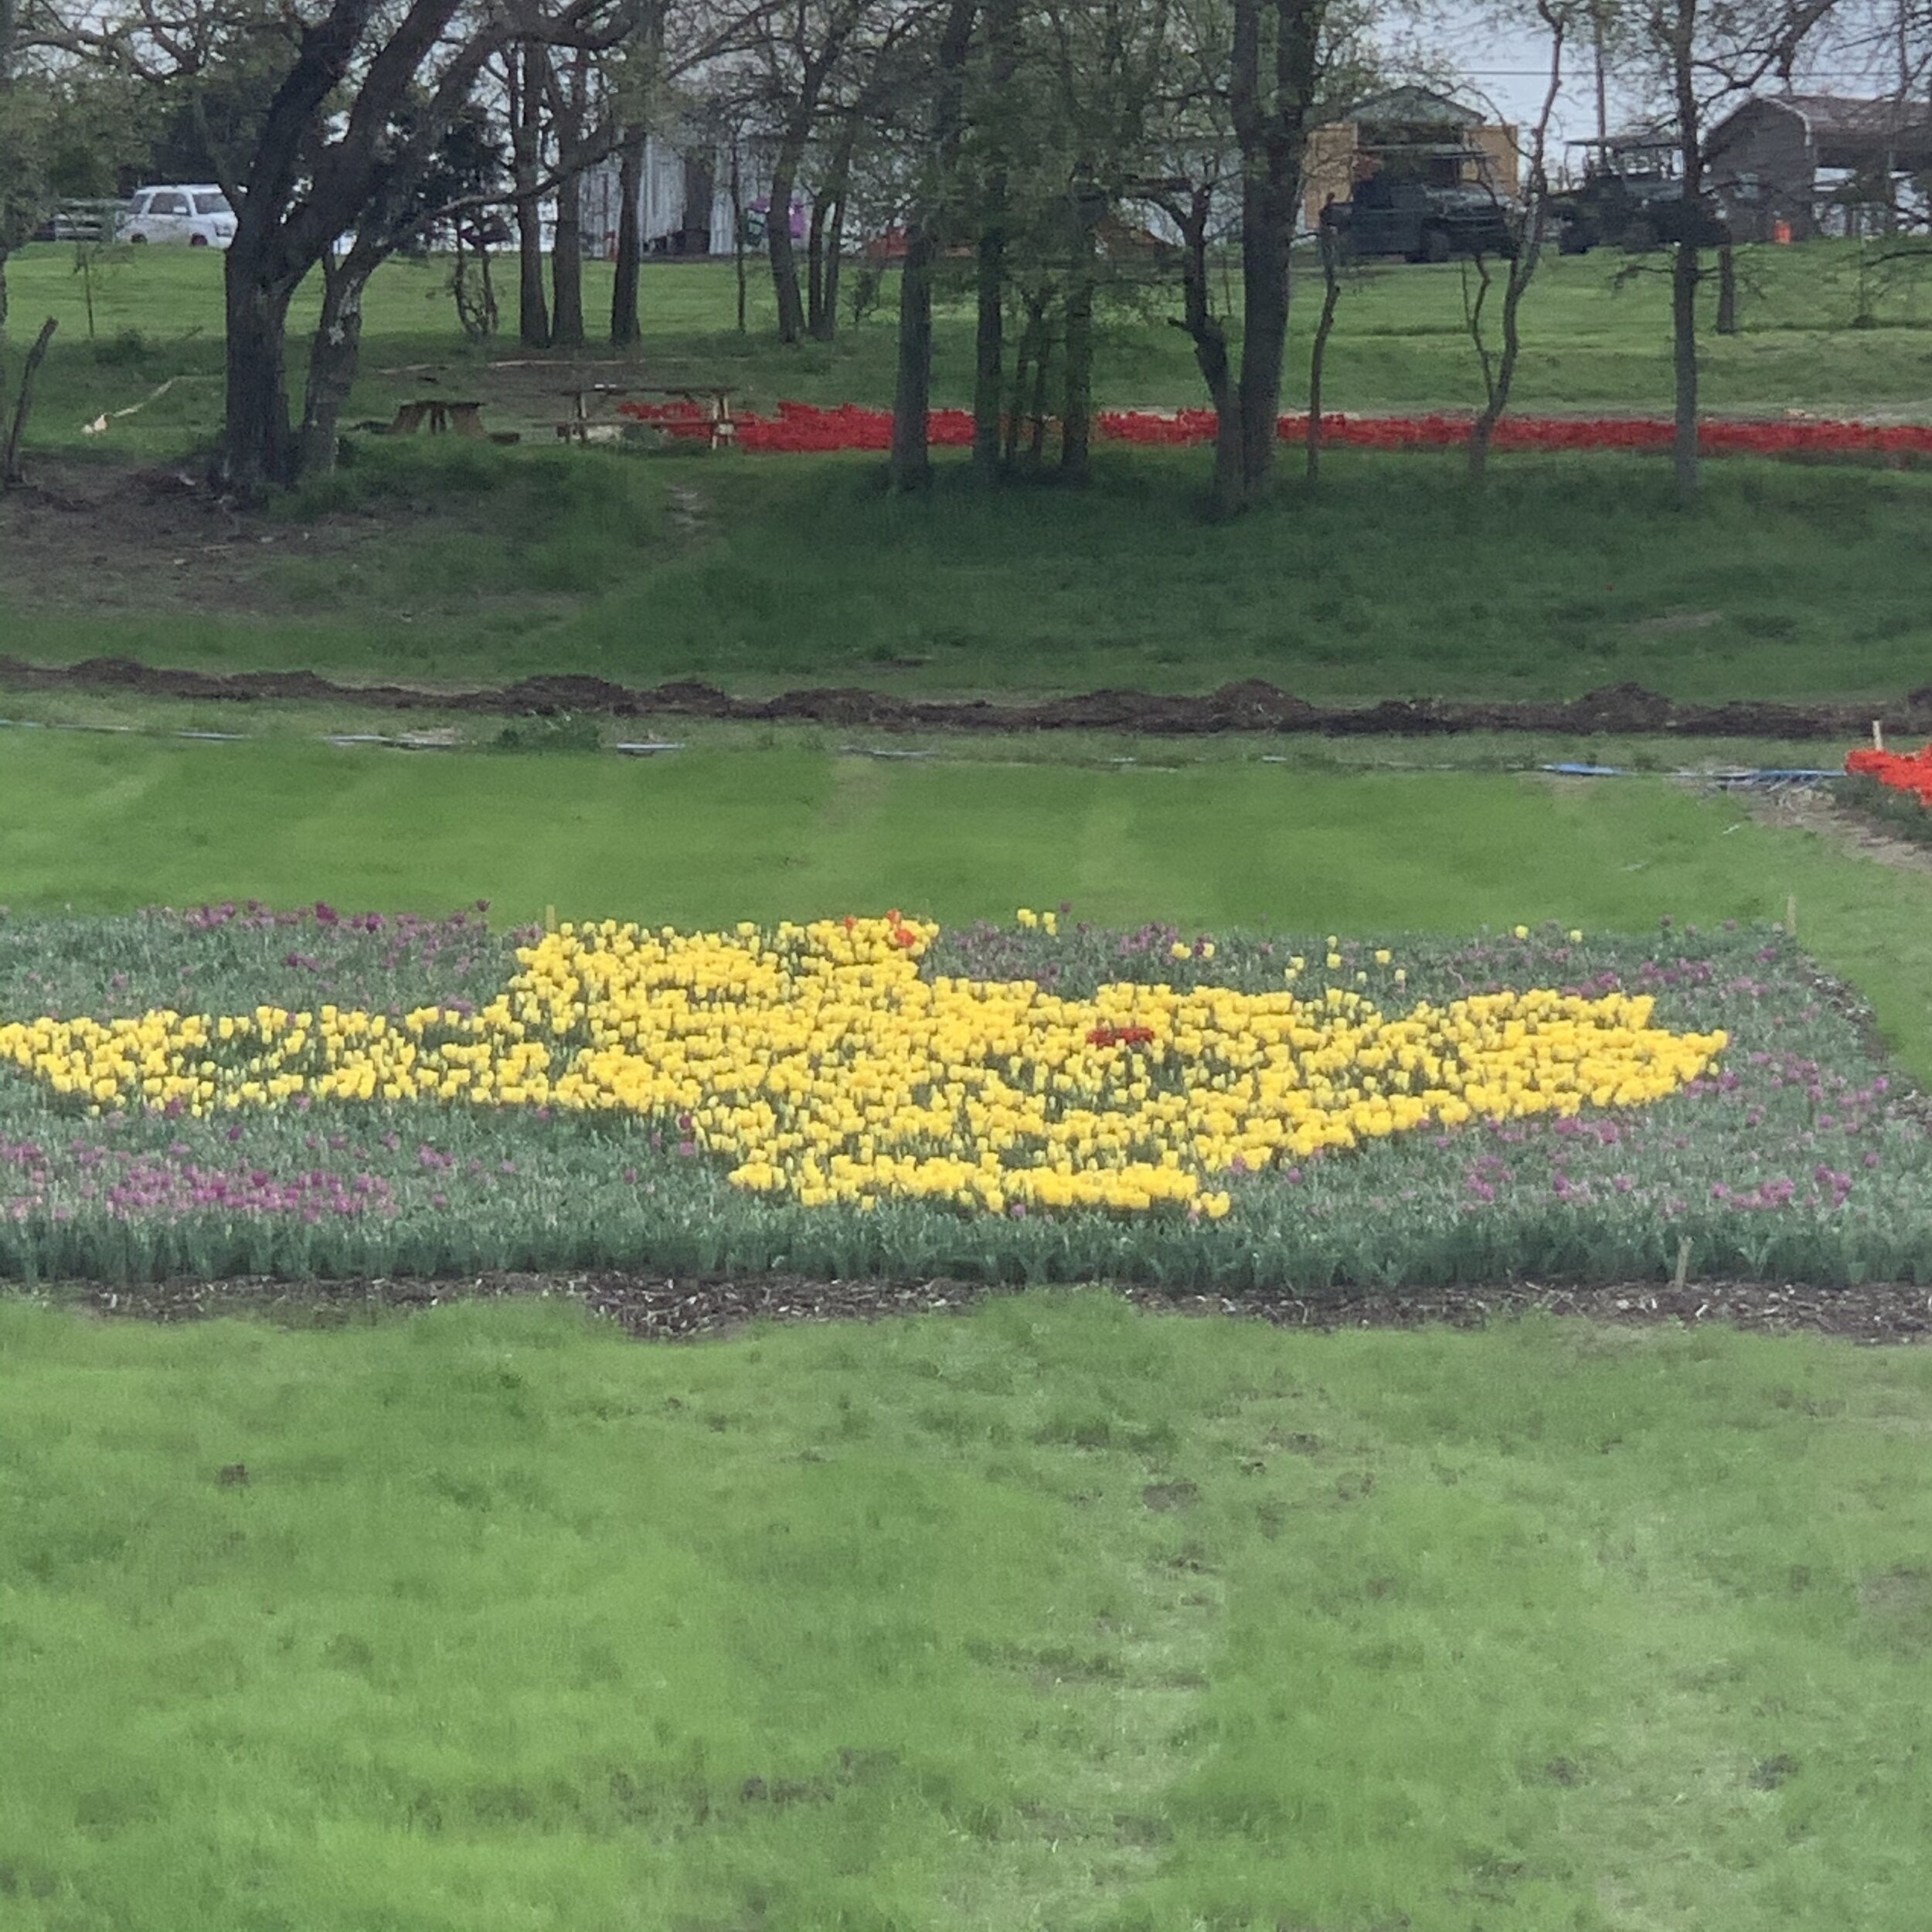  Also planted in the middle of the nursery section, is a large patch of yellow tulips in the shape of the state of Texas.  